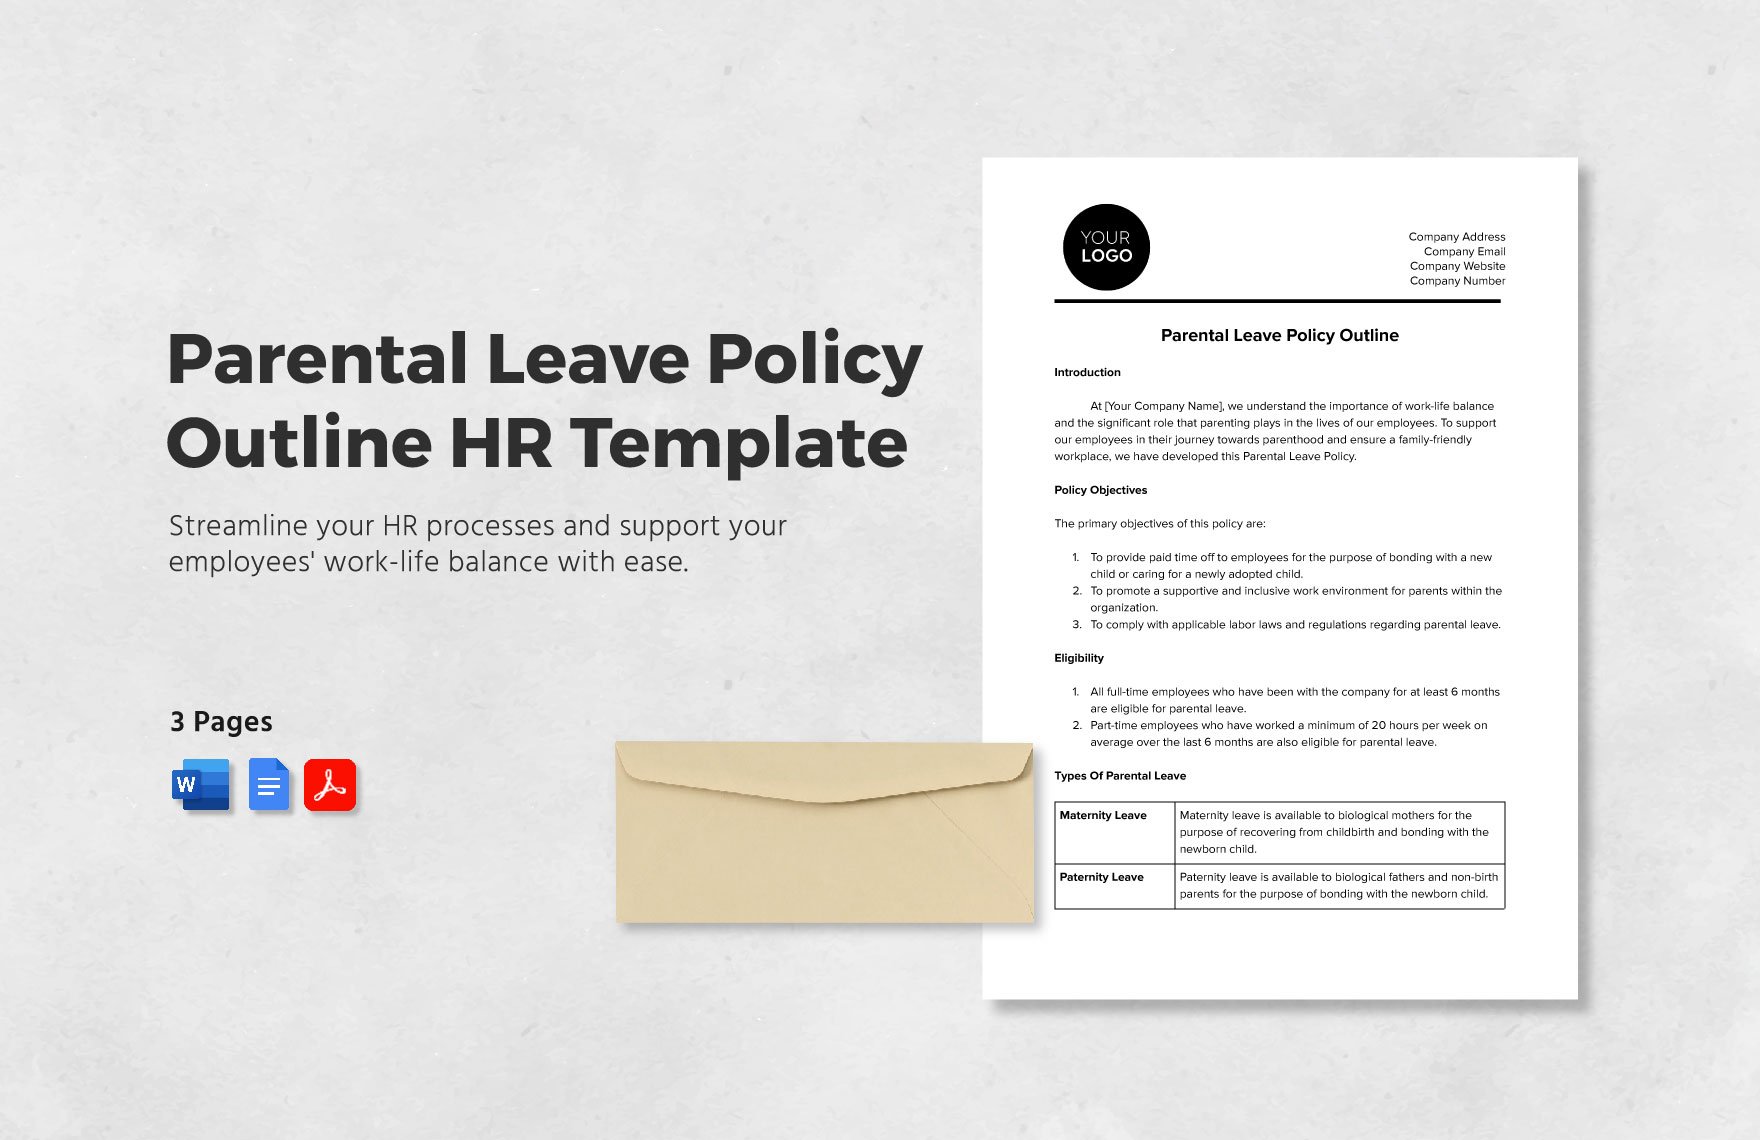 Parental Leave Policy Outline HR Template in Word, Google Docs, PDF